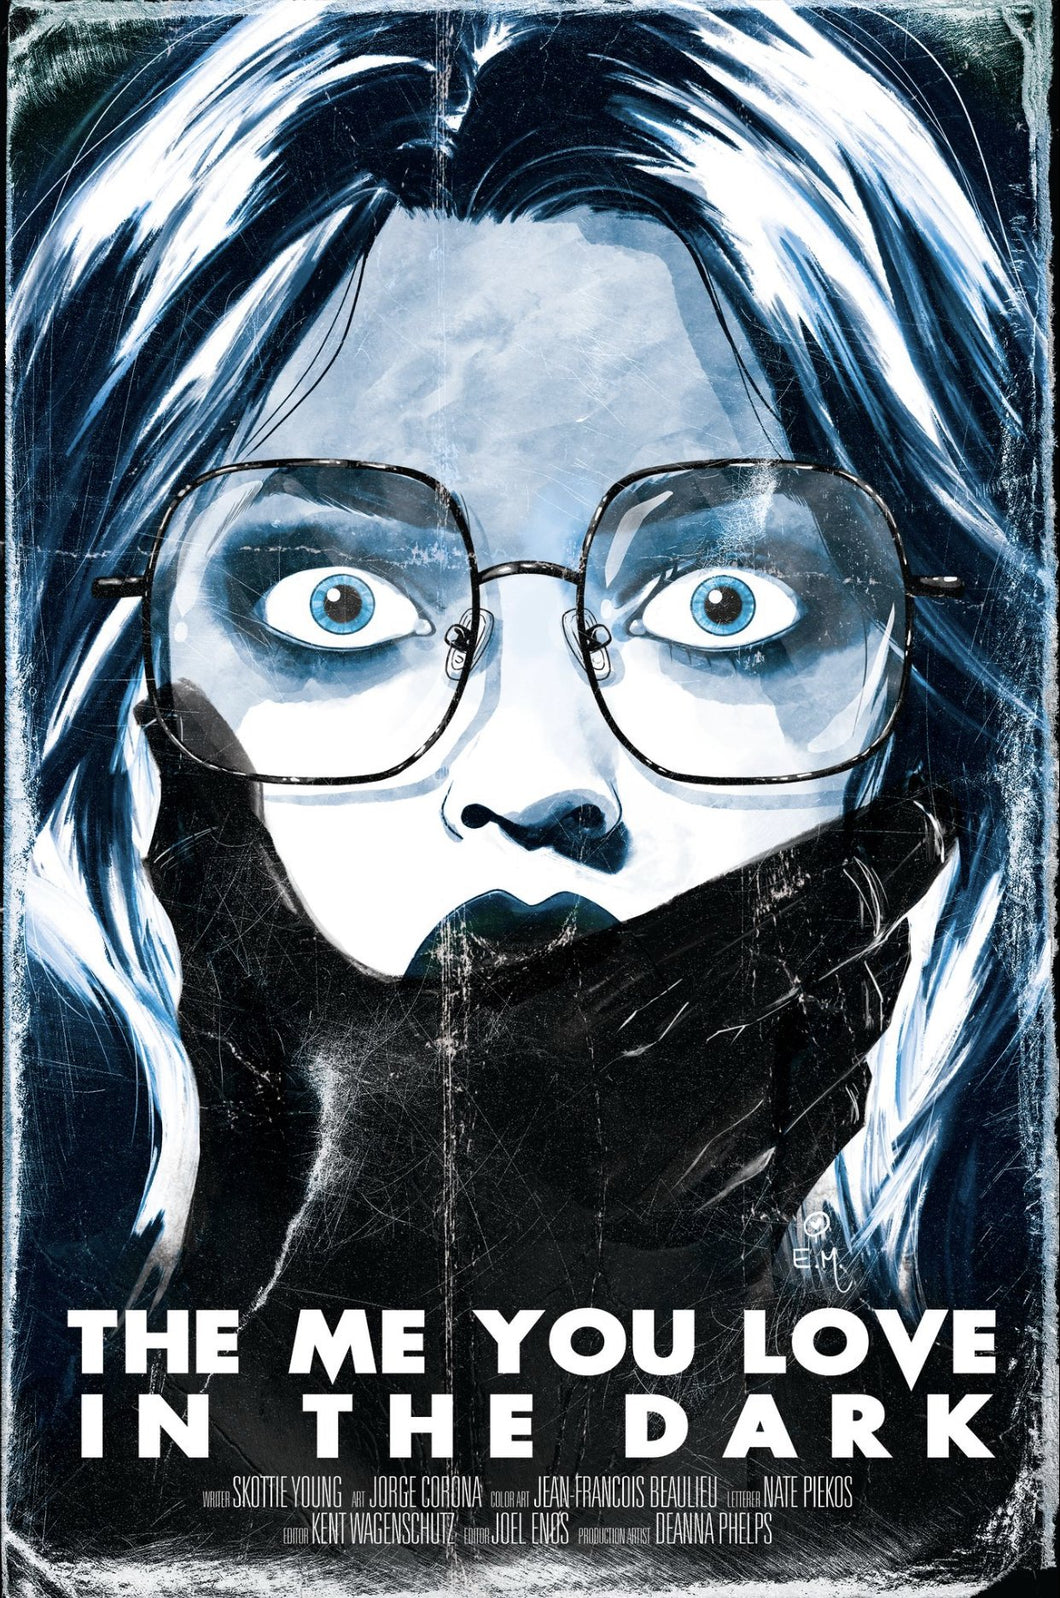 THE ME YOU LOVE IN THE DARK #1 by Megan Hutchison-Cates  - 'SCREAM' Movie Homage Limited Variant - Cover A (LTD to 750)